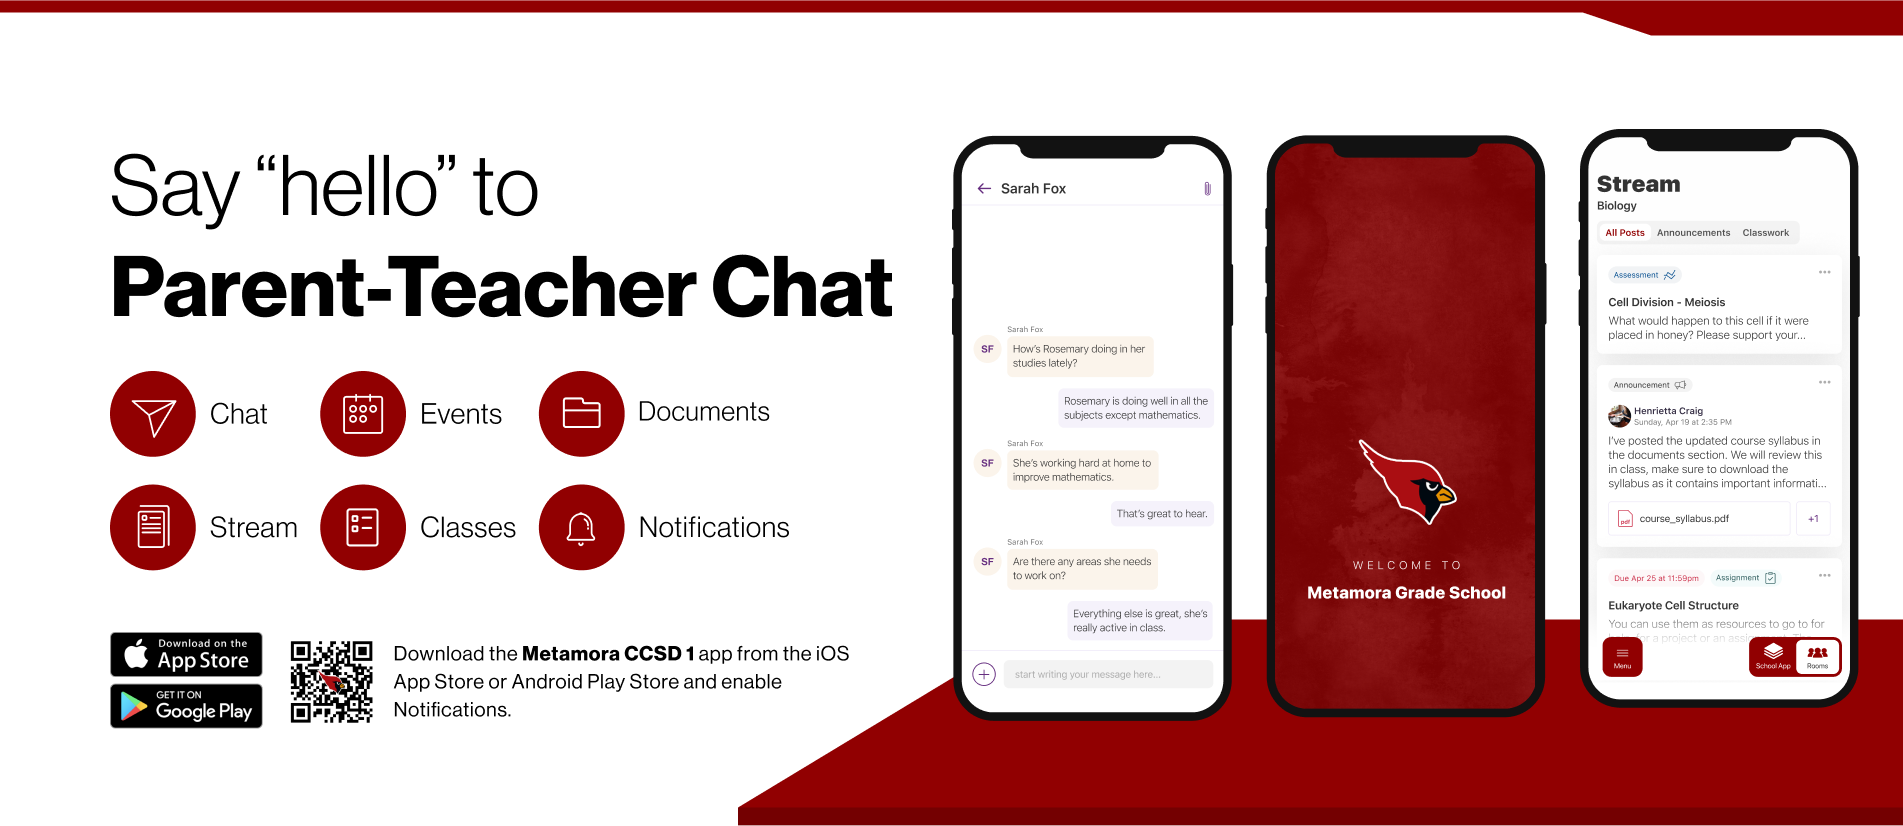 SAY HELLO TO PARENT TEACHER CHAT DOWNLOAD THE METAMORA GRADE SCHOOL APP AND CONNECT